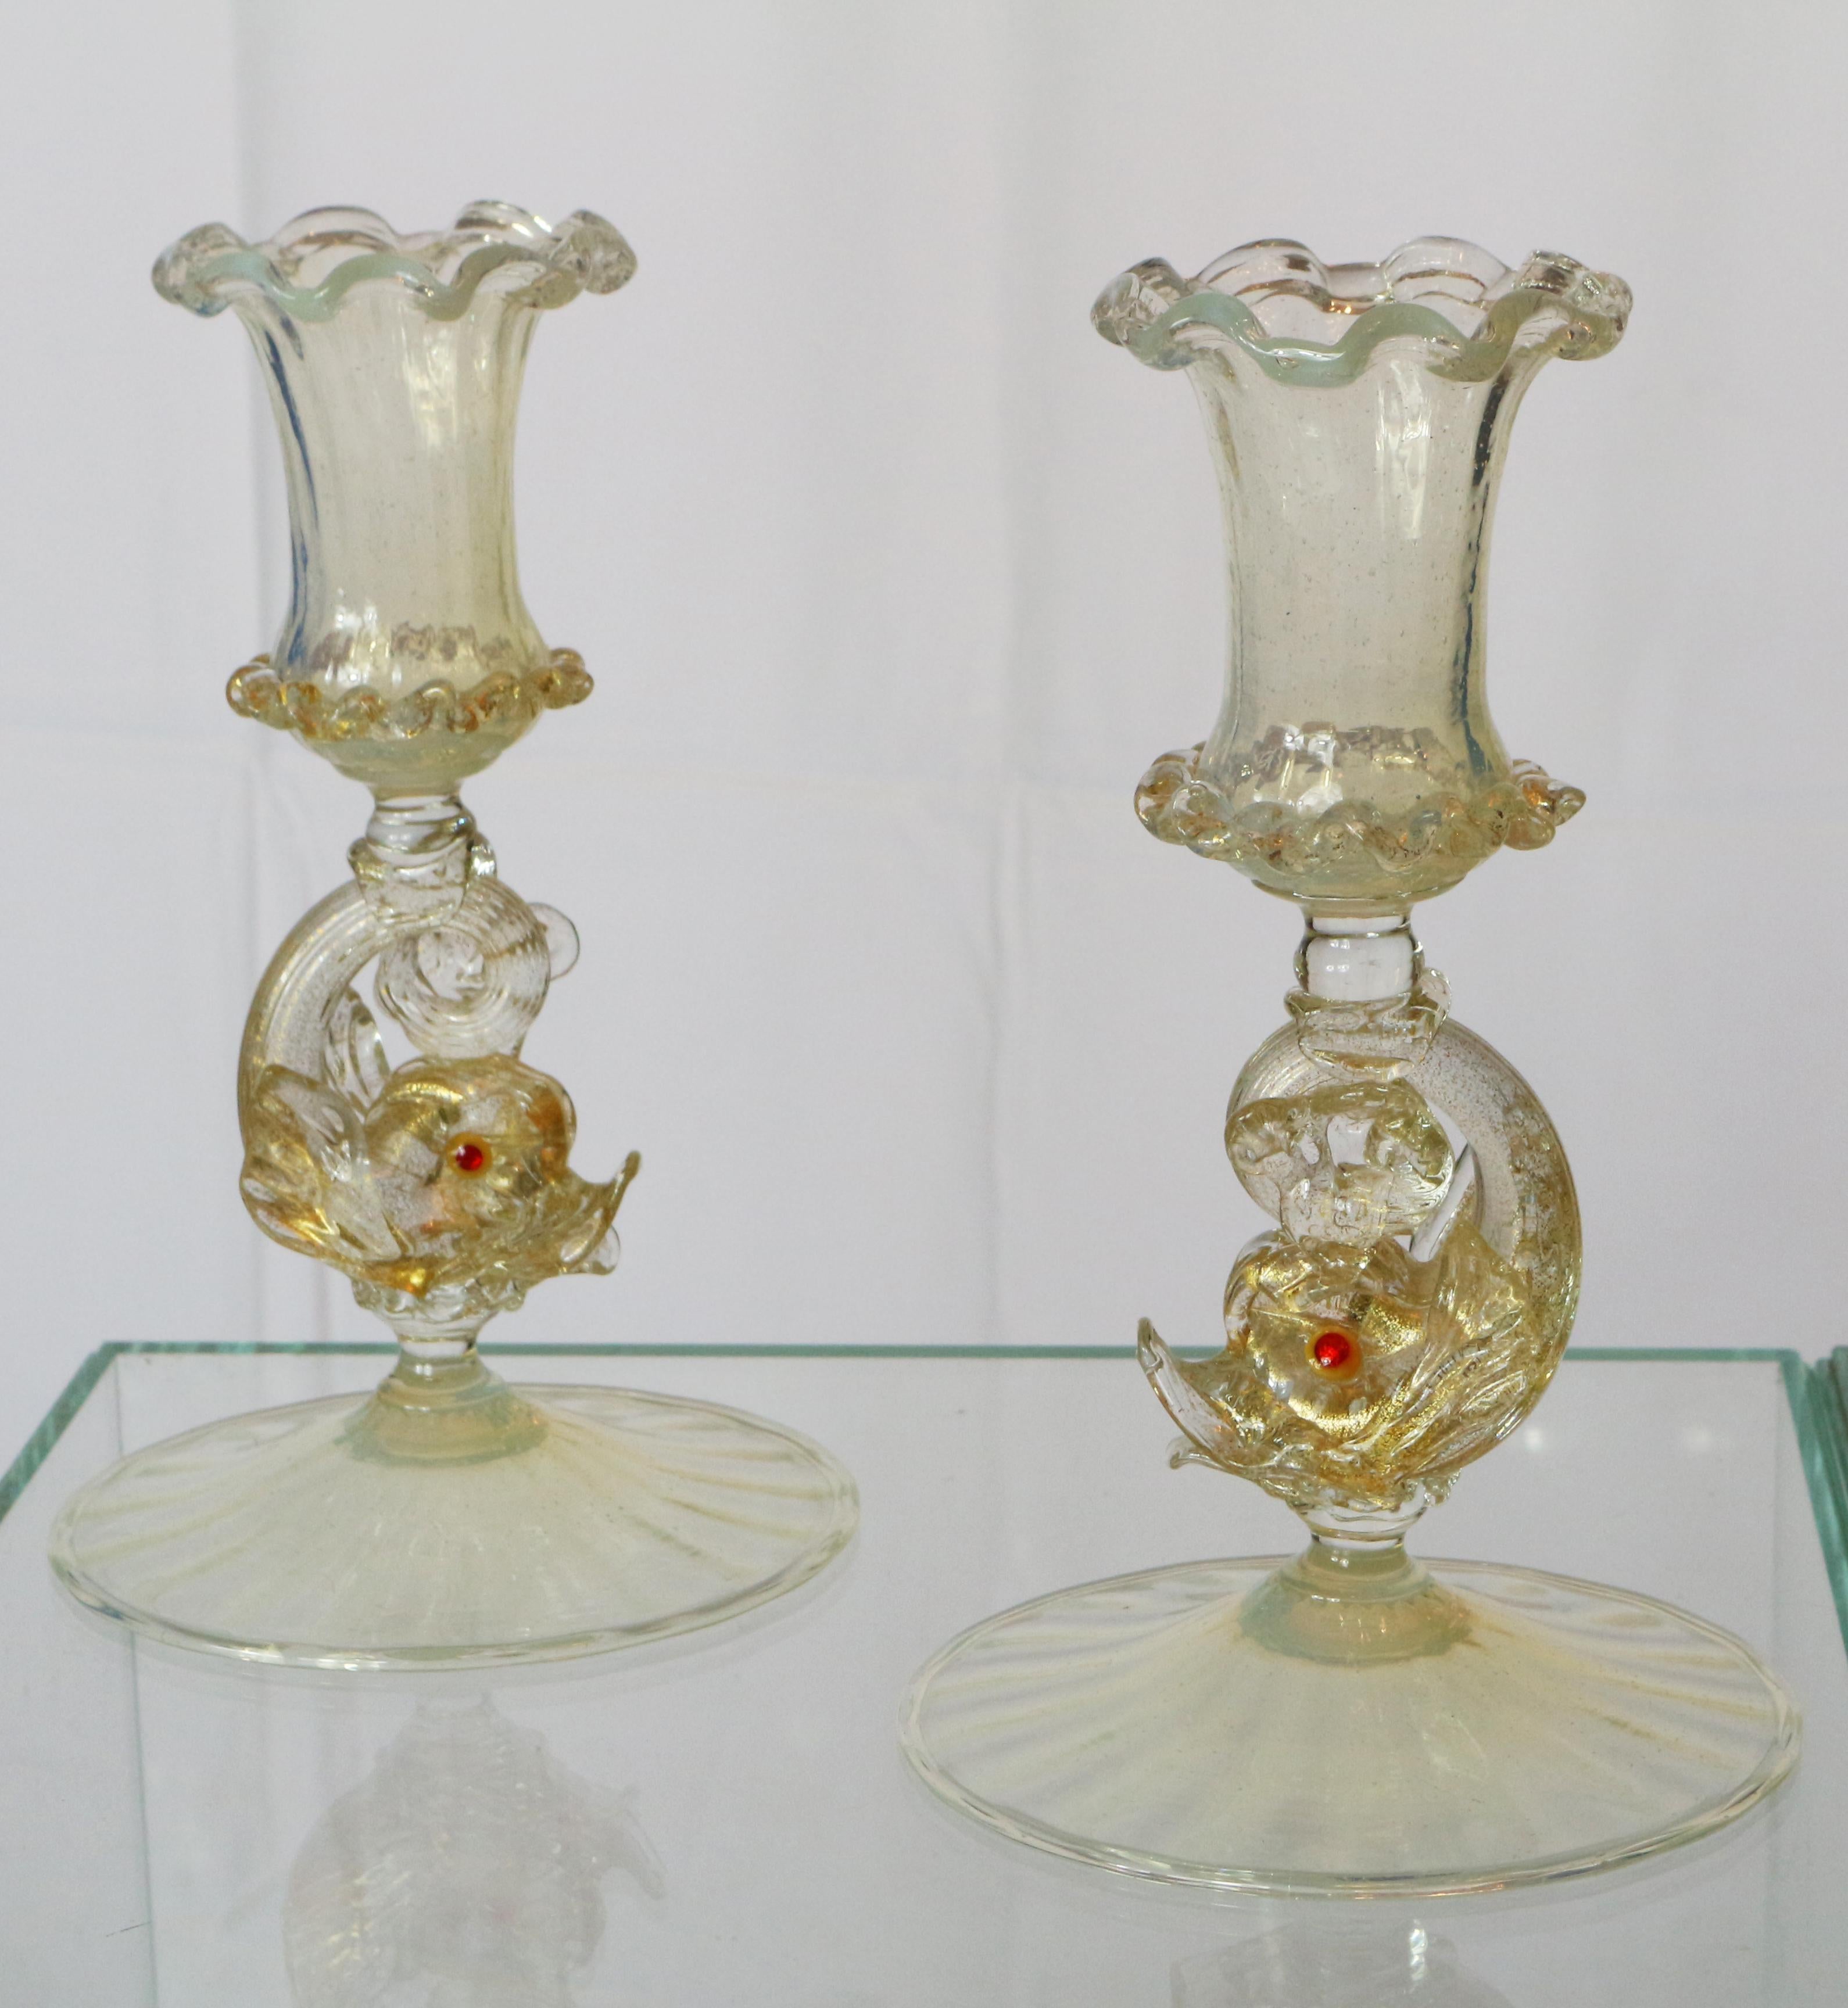 Pair of early-20th gold opal venetian candlestick by A.Salviati.

Antonio Salviati founded in 1866 a blown glass factory, the Venice and Murano company limited. This was a period of research for the Murano master and among the many techniques taken